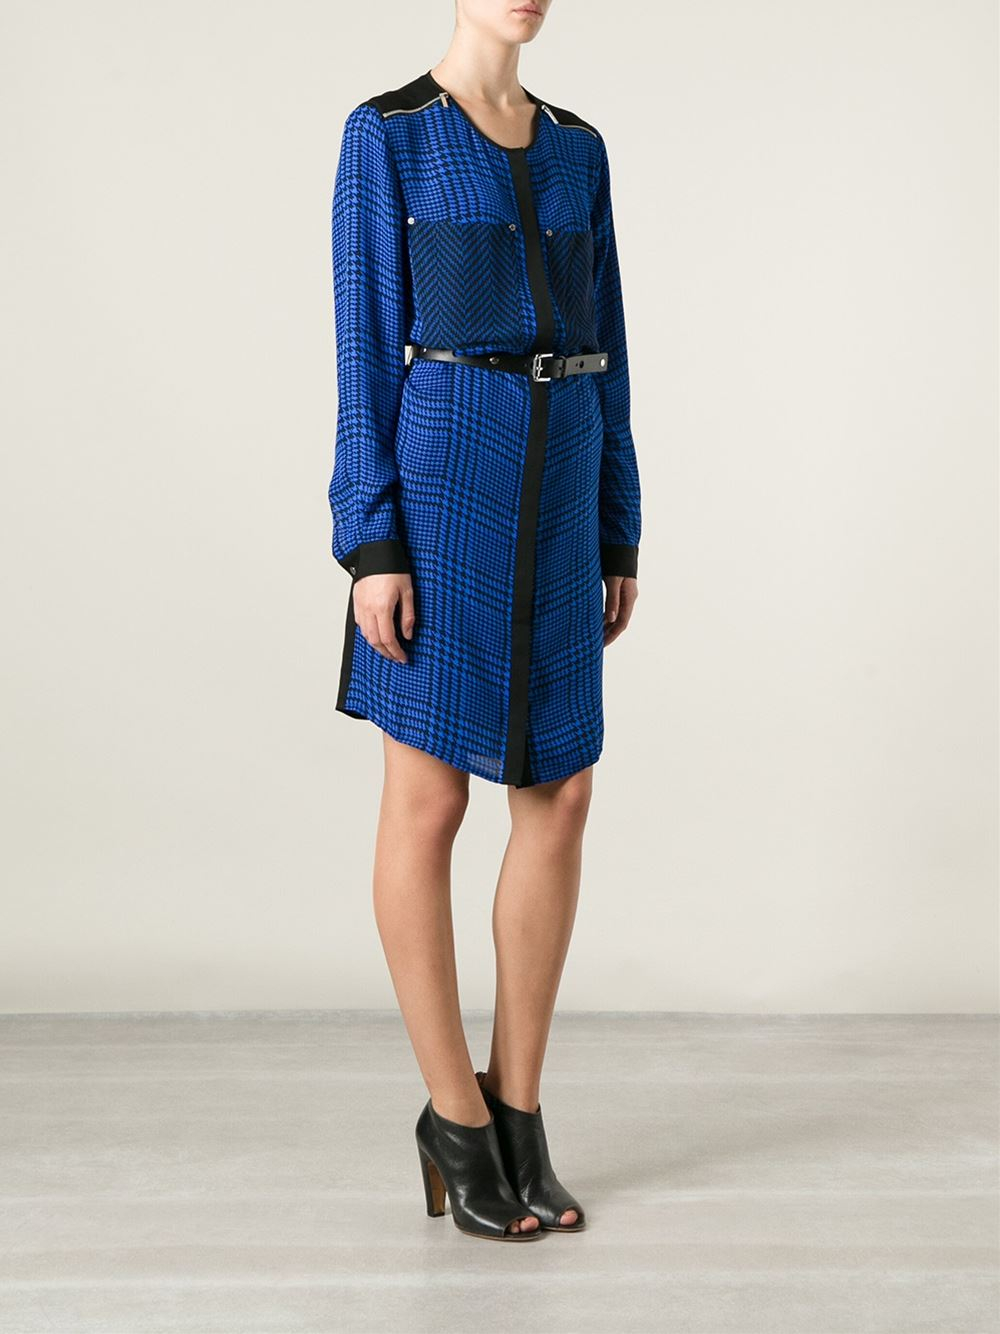 Lyst - Michael Michael Kors Houndstooth Print Belted Dress in Blue